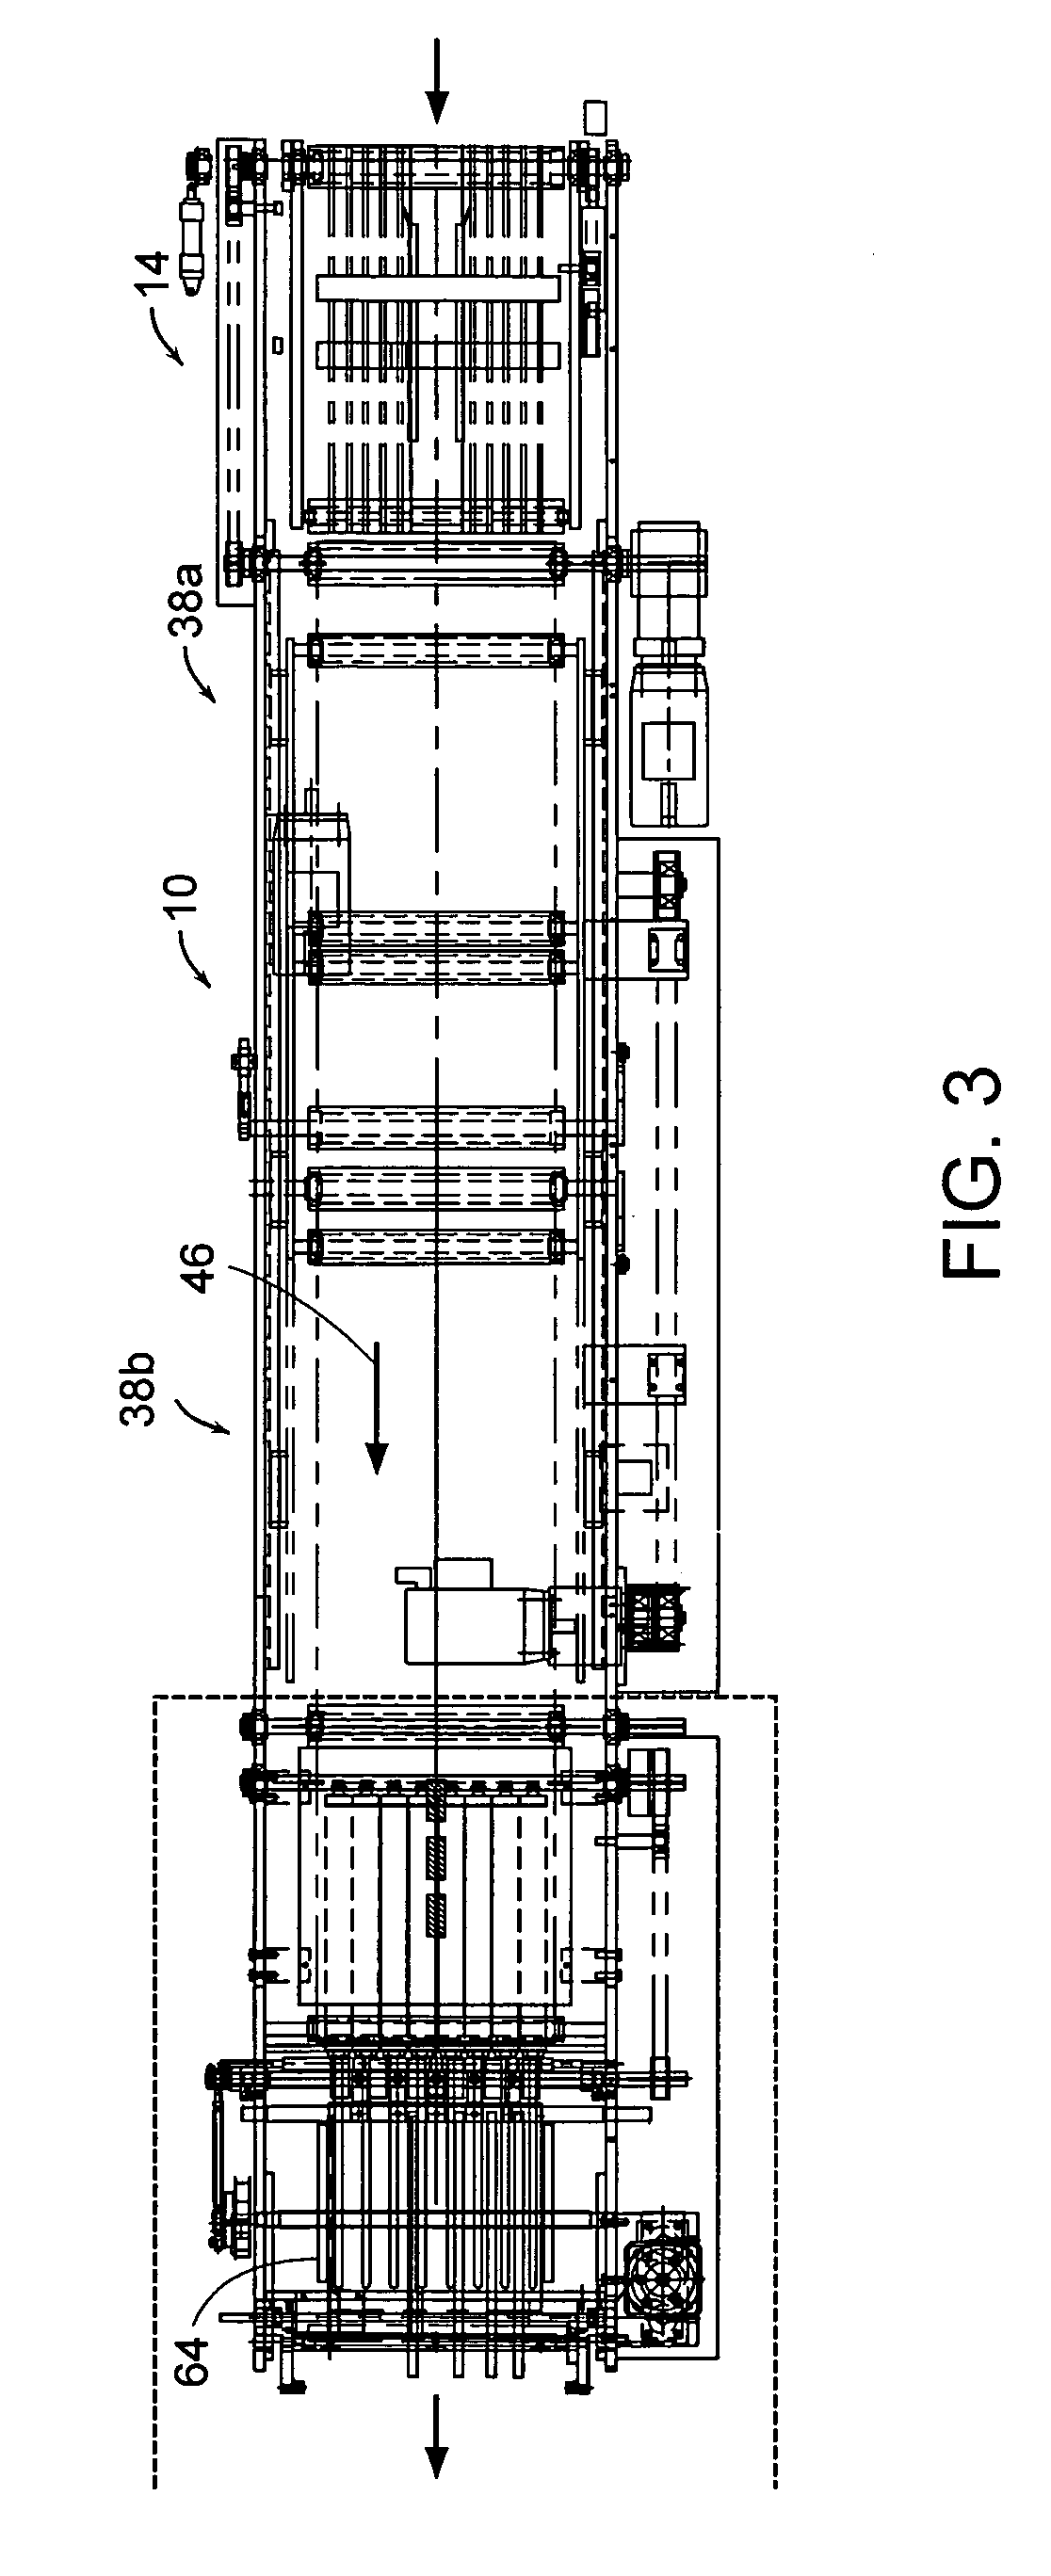 Inline stacker with non-interrupt gap generator and integrated drive control and jam response